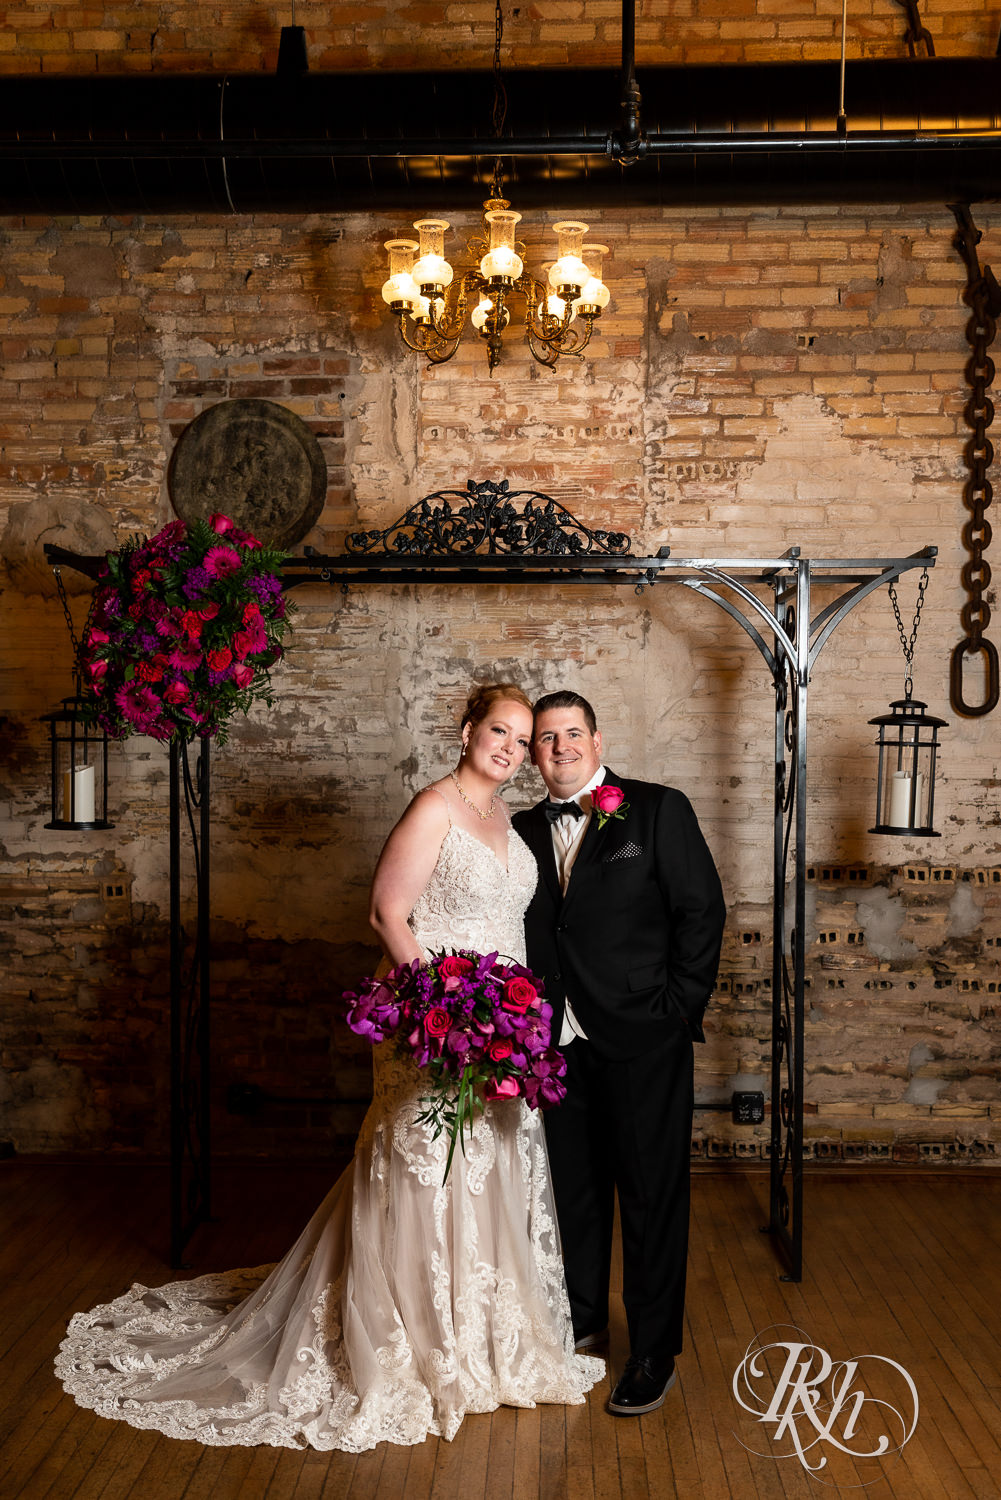 Bride and groom together at alter at Kellerman's Event Center in White Bear Lake, Minnesota.